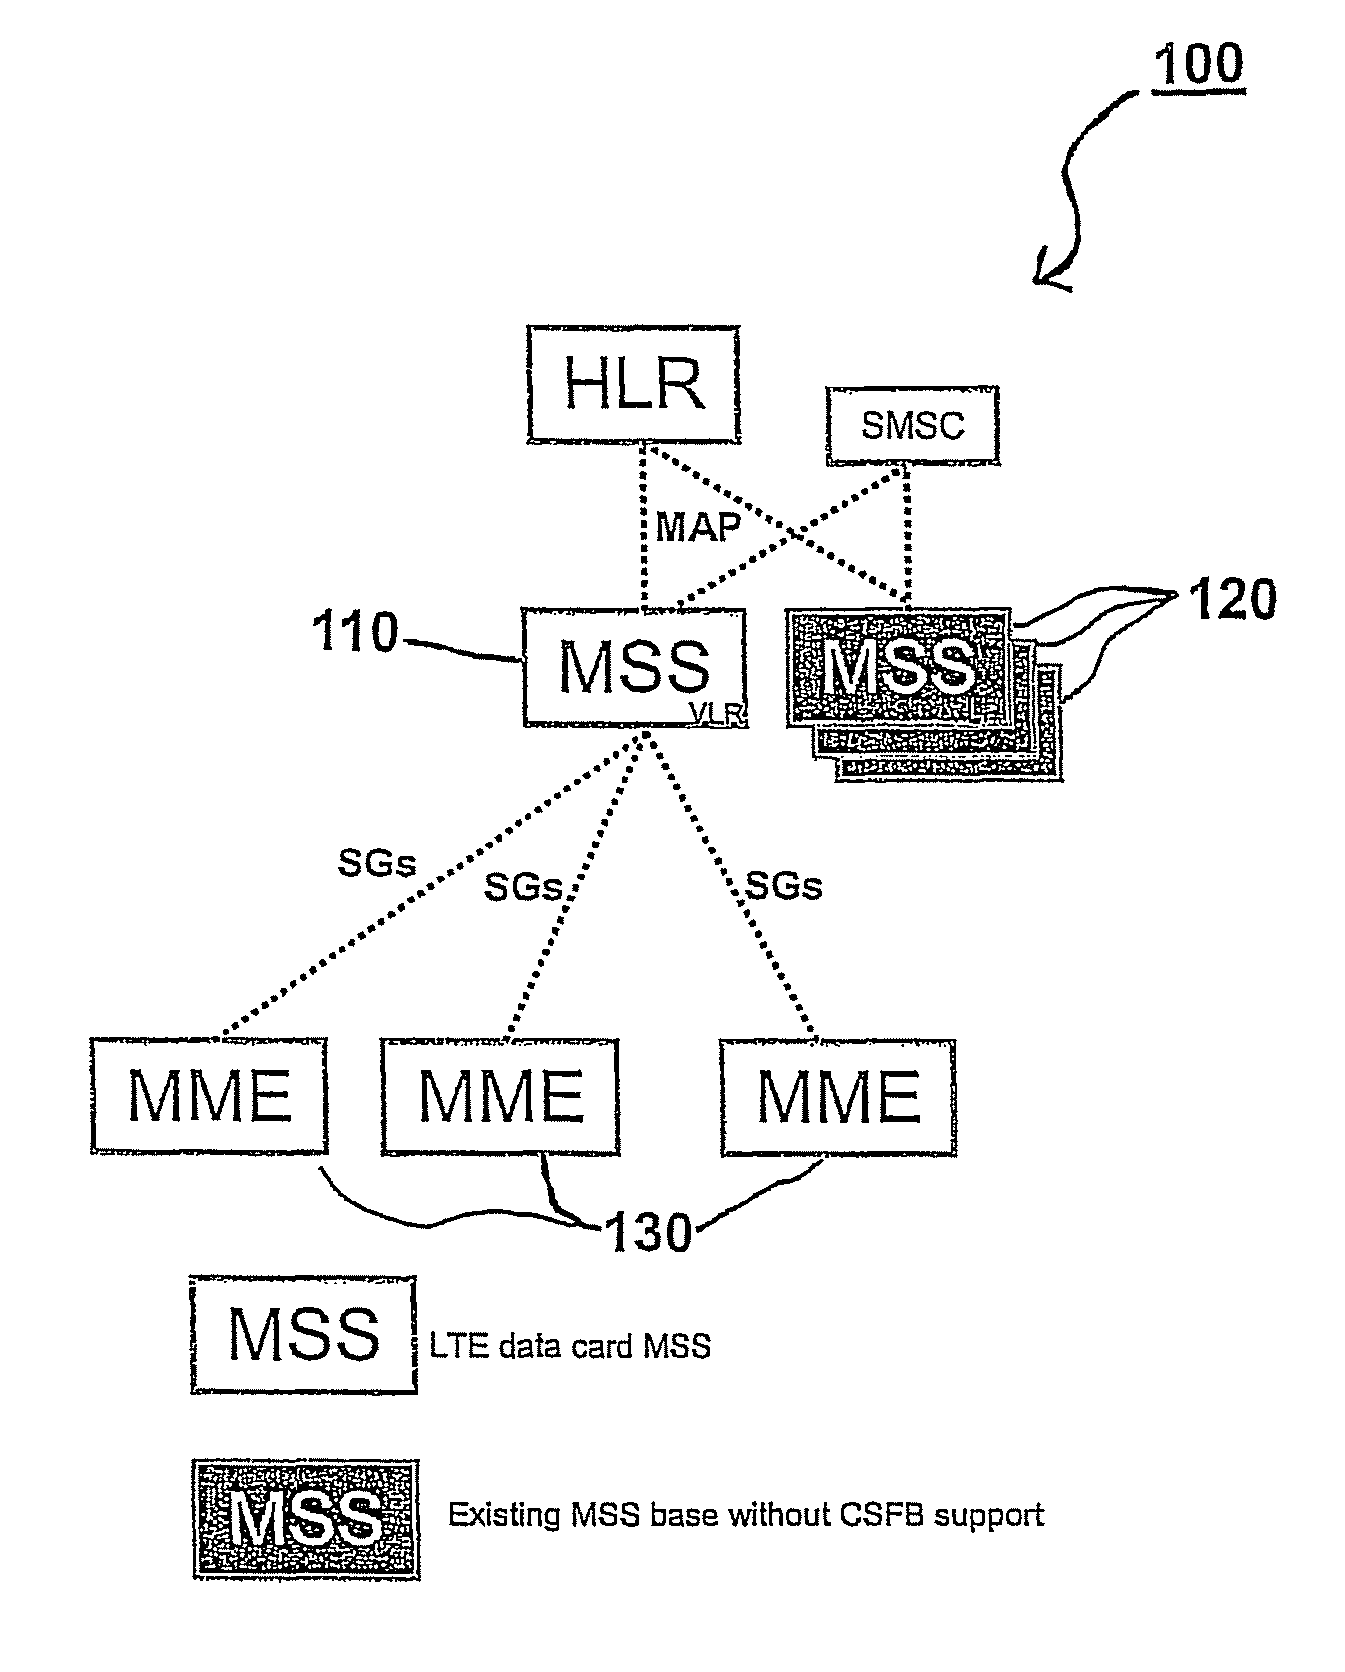 Mobile management entity operating in communications network and selection method therefor